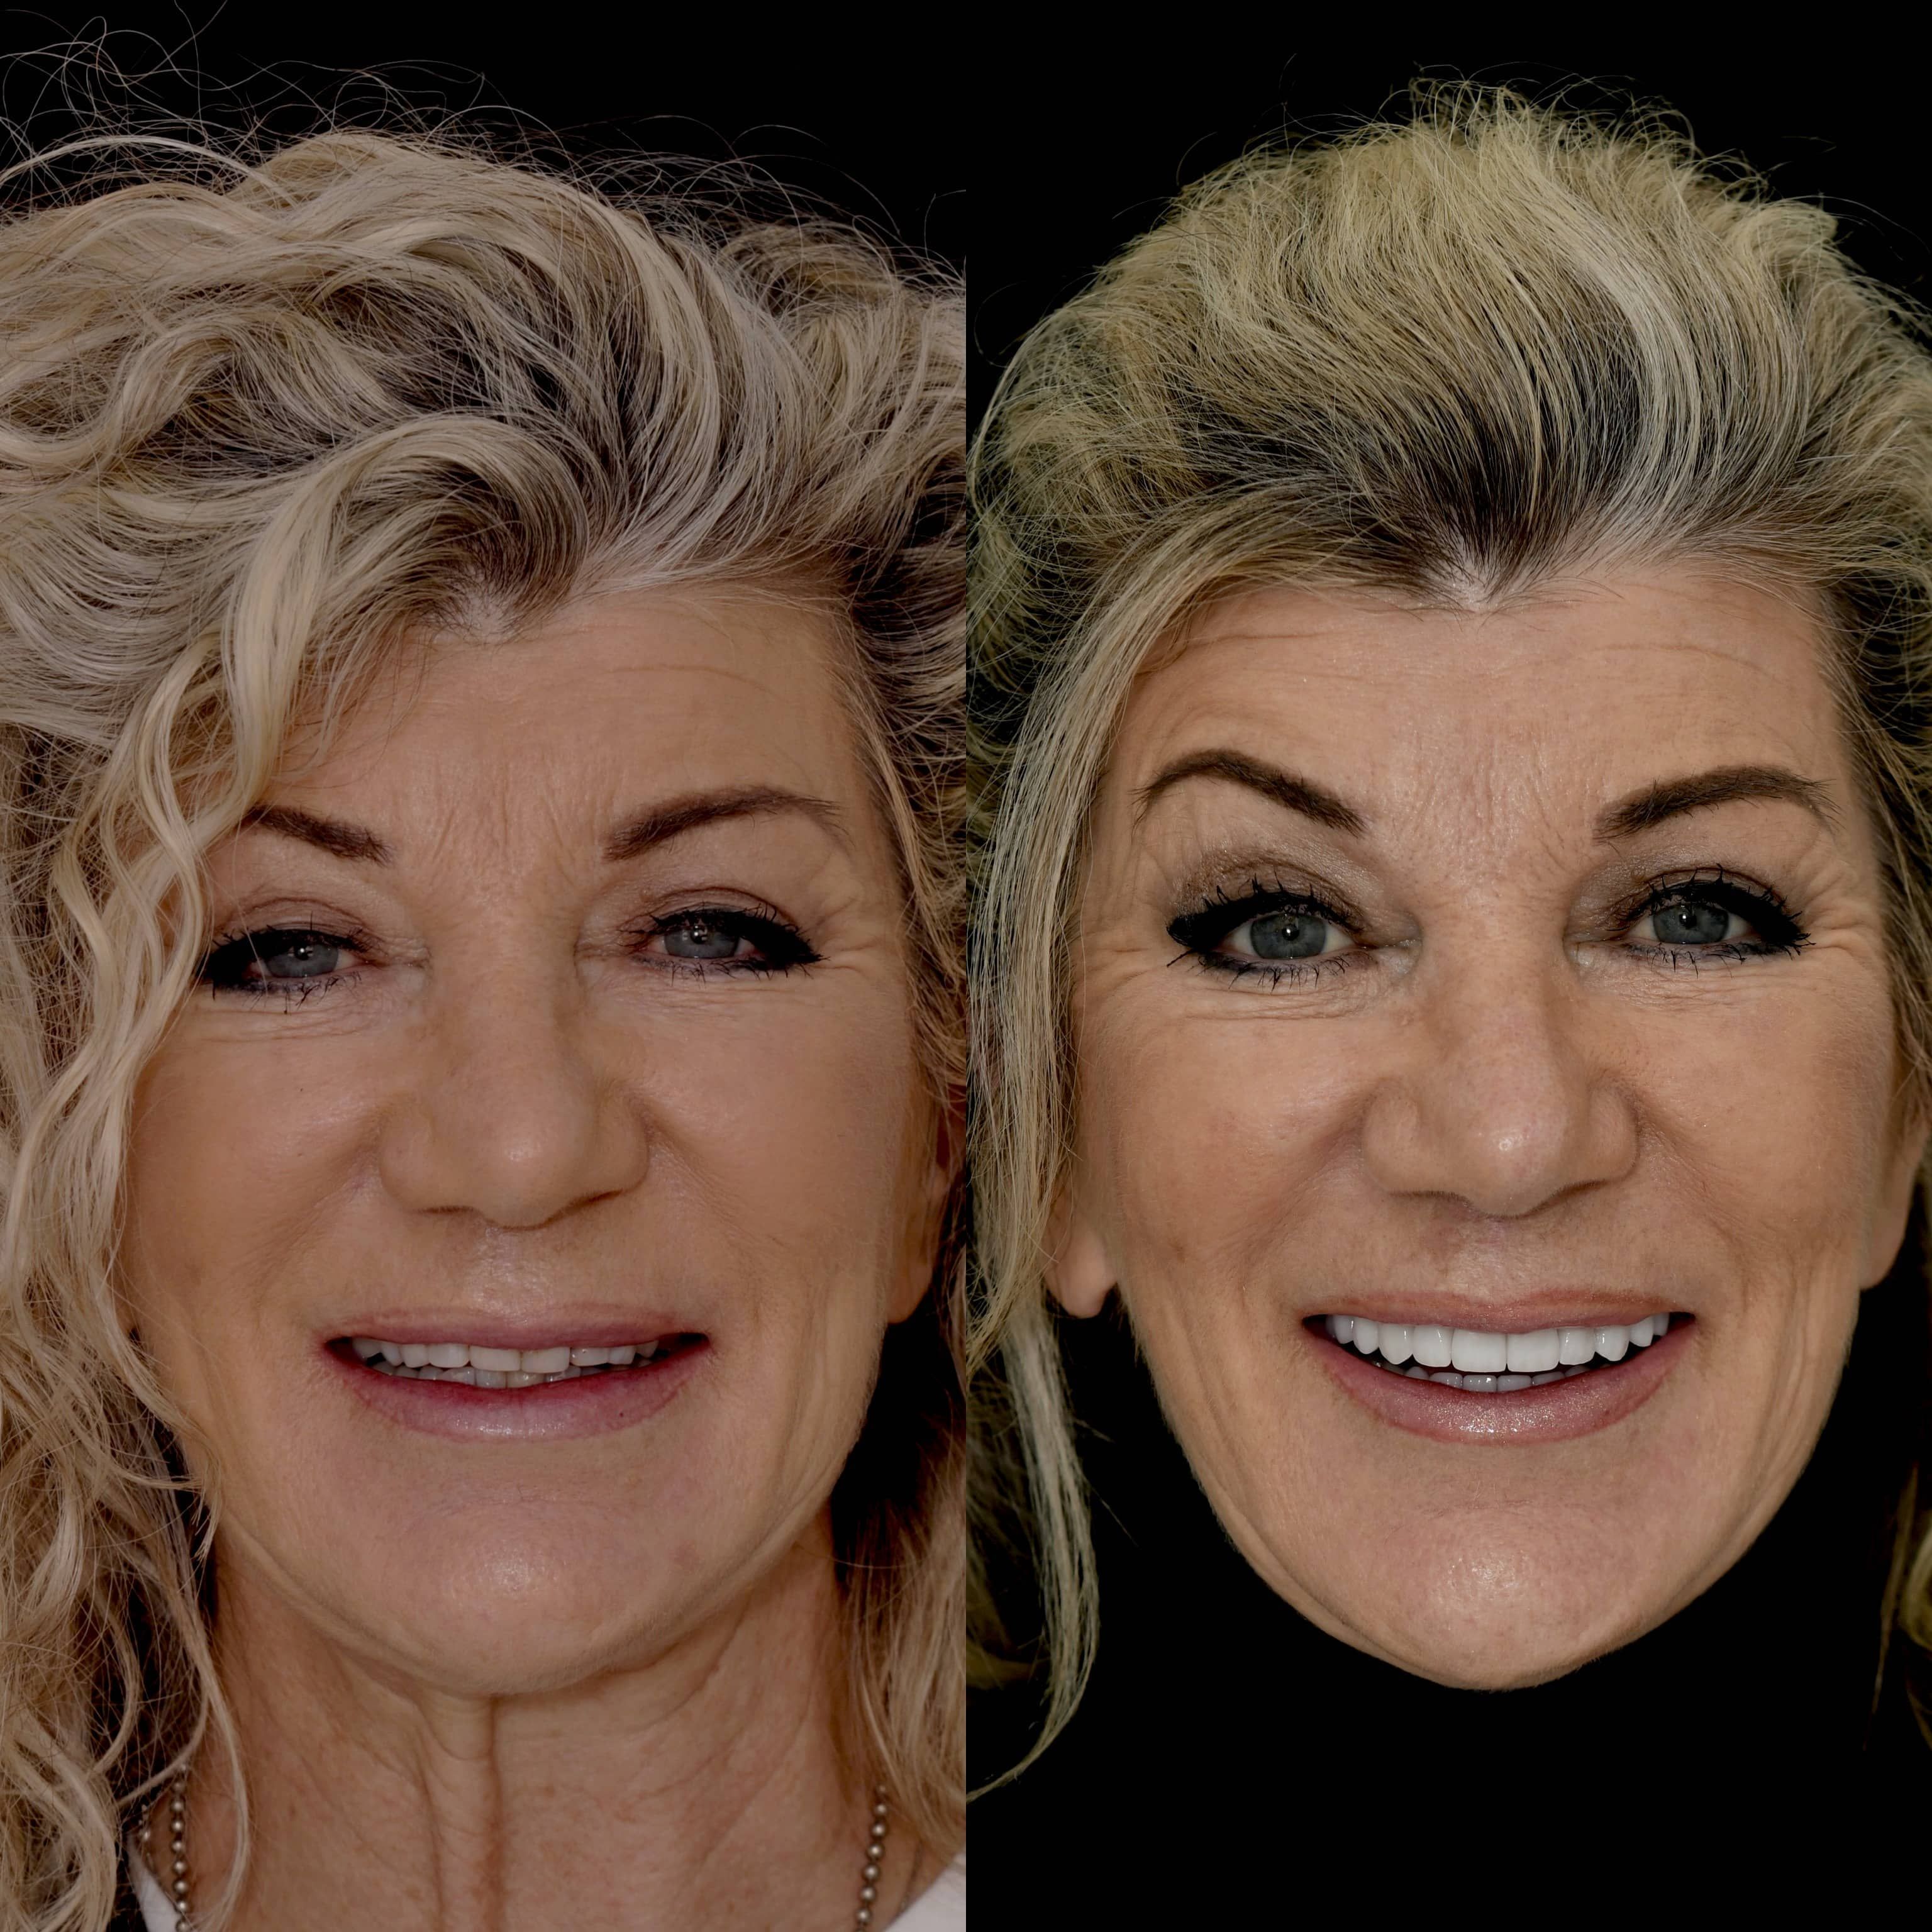 State-of-the-art veneers results in Beverly Hills dentist